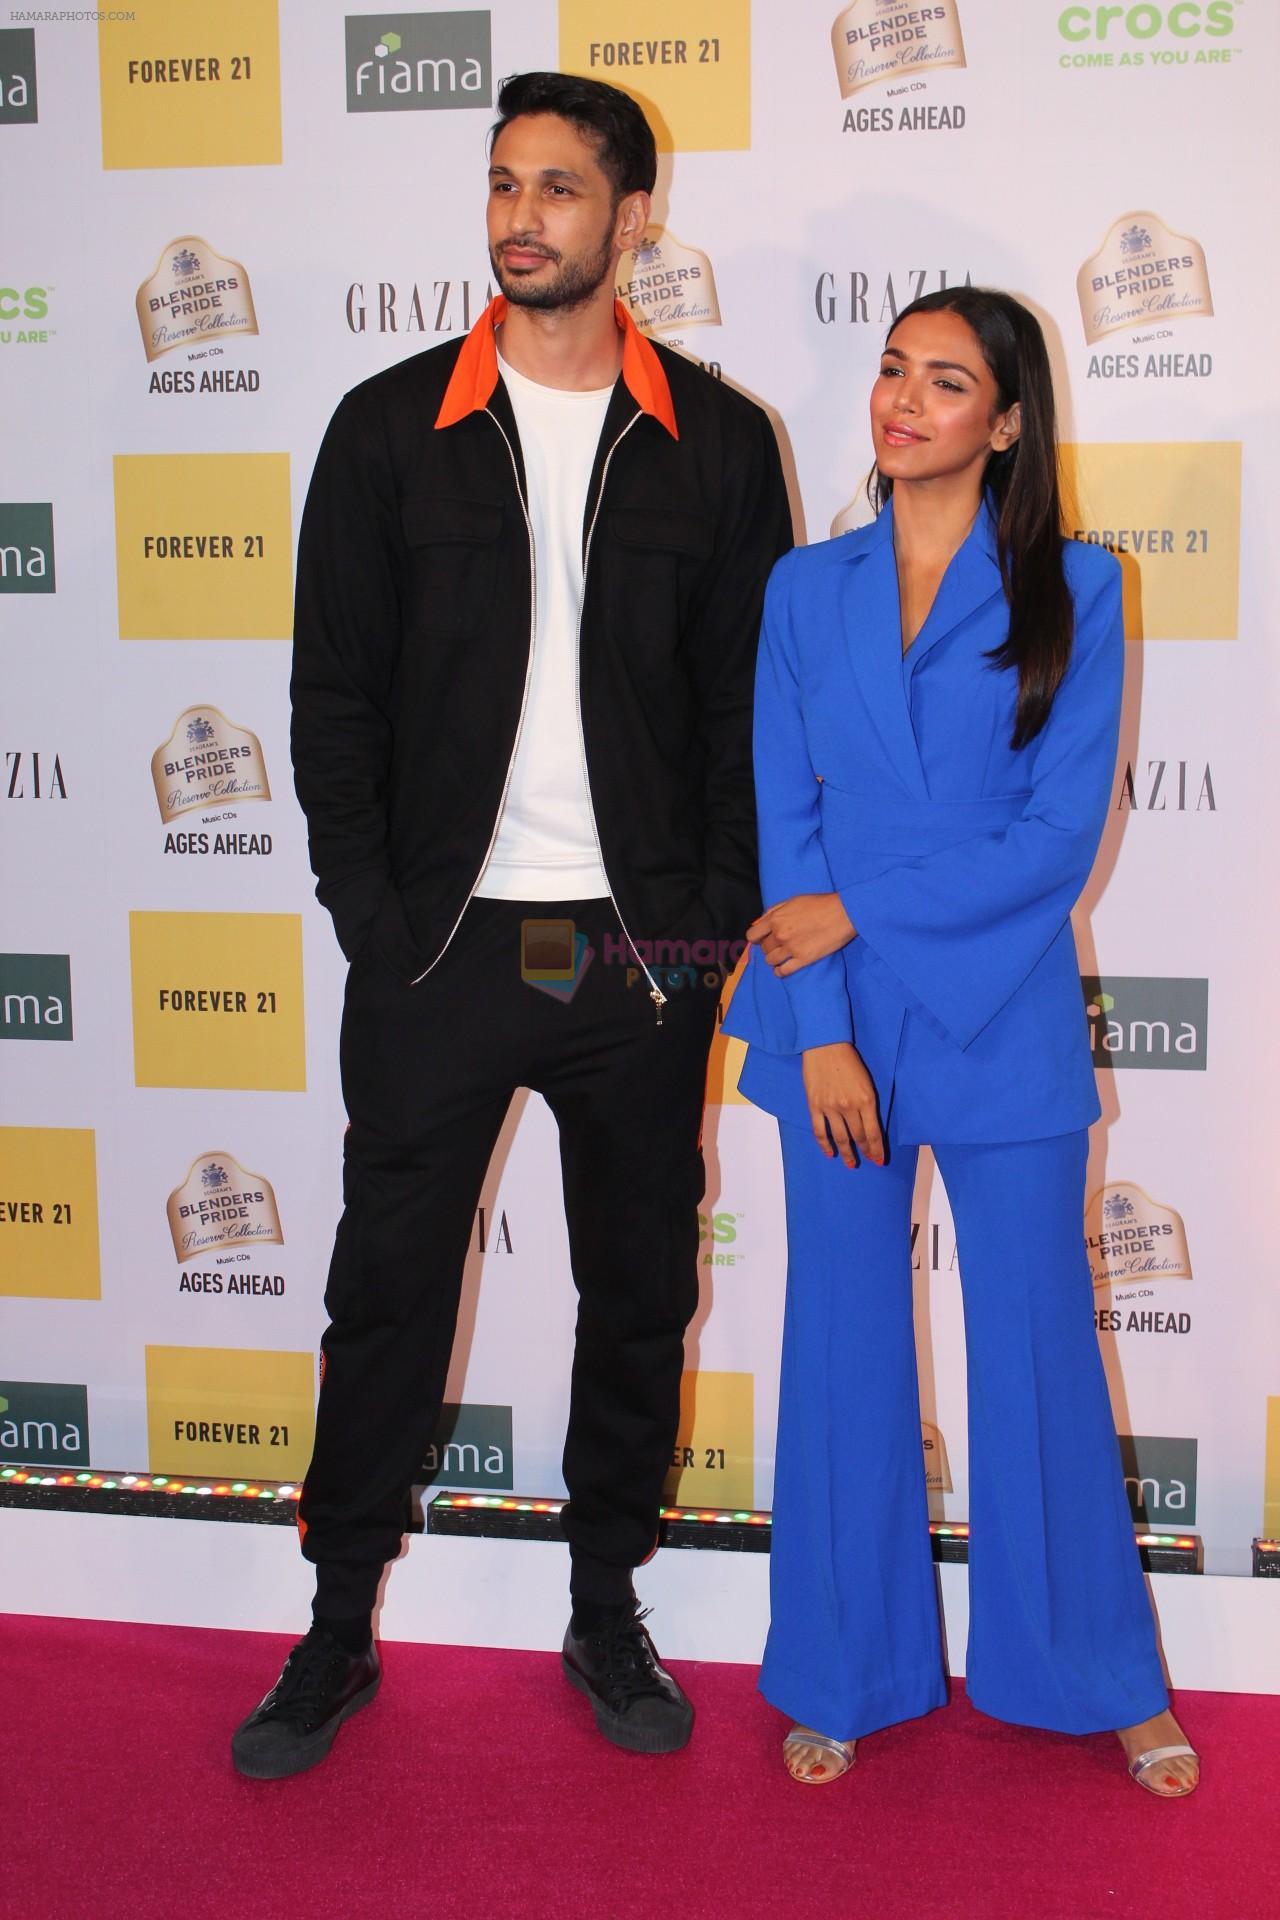 Shriya Pilgaonkar at the Red Carpet of 1st Edition of Grazia Millennial Awards on 19th June 2019 on 19th June 2019